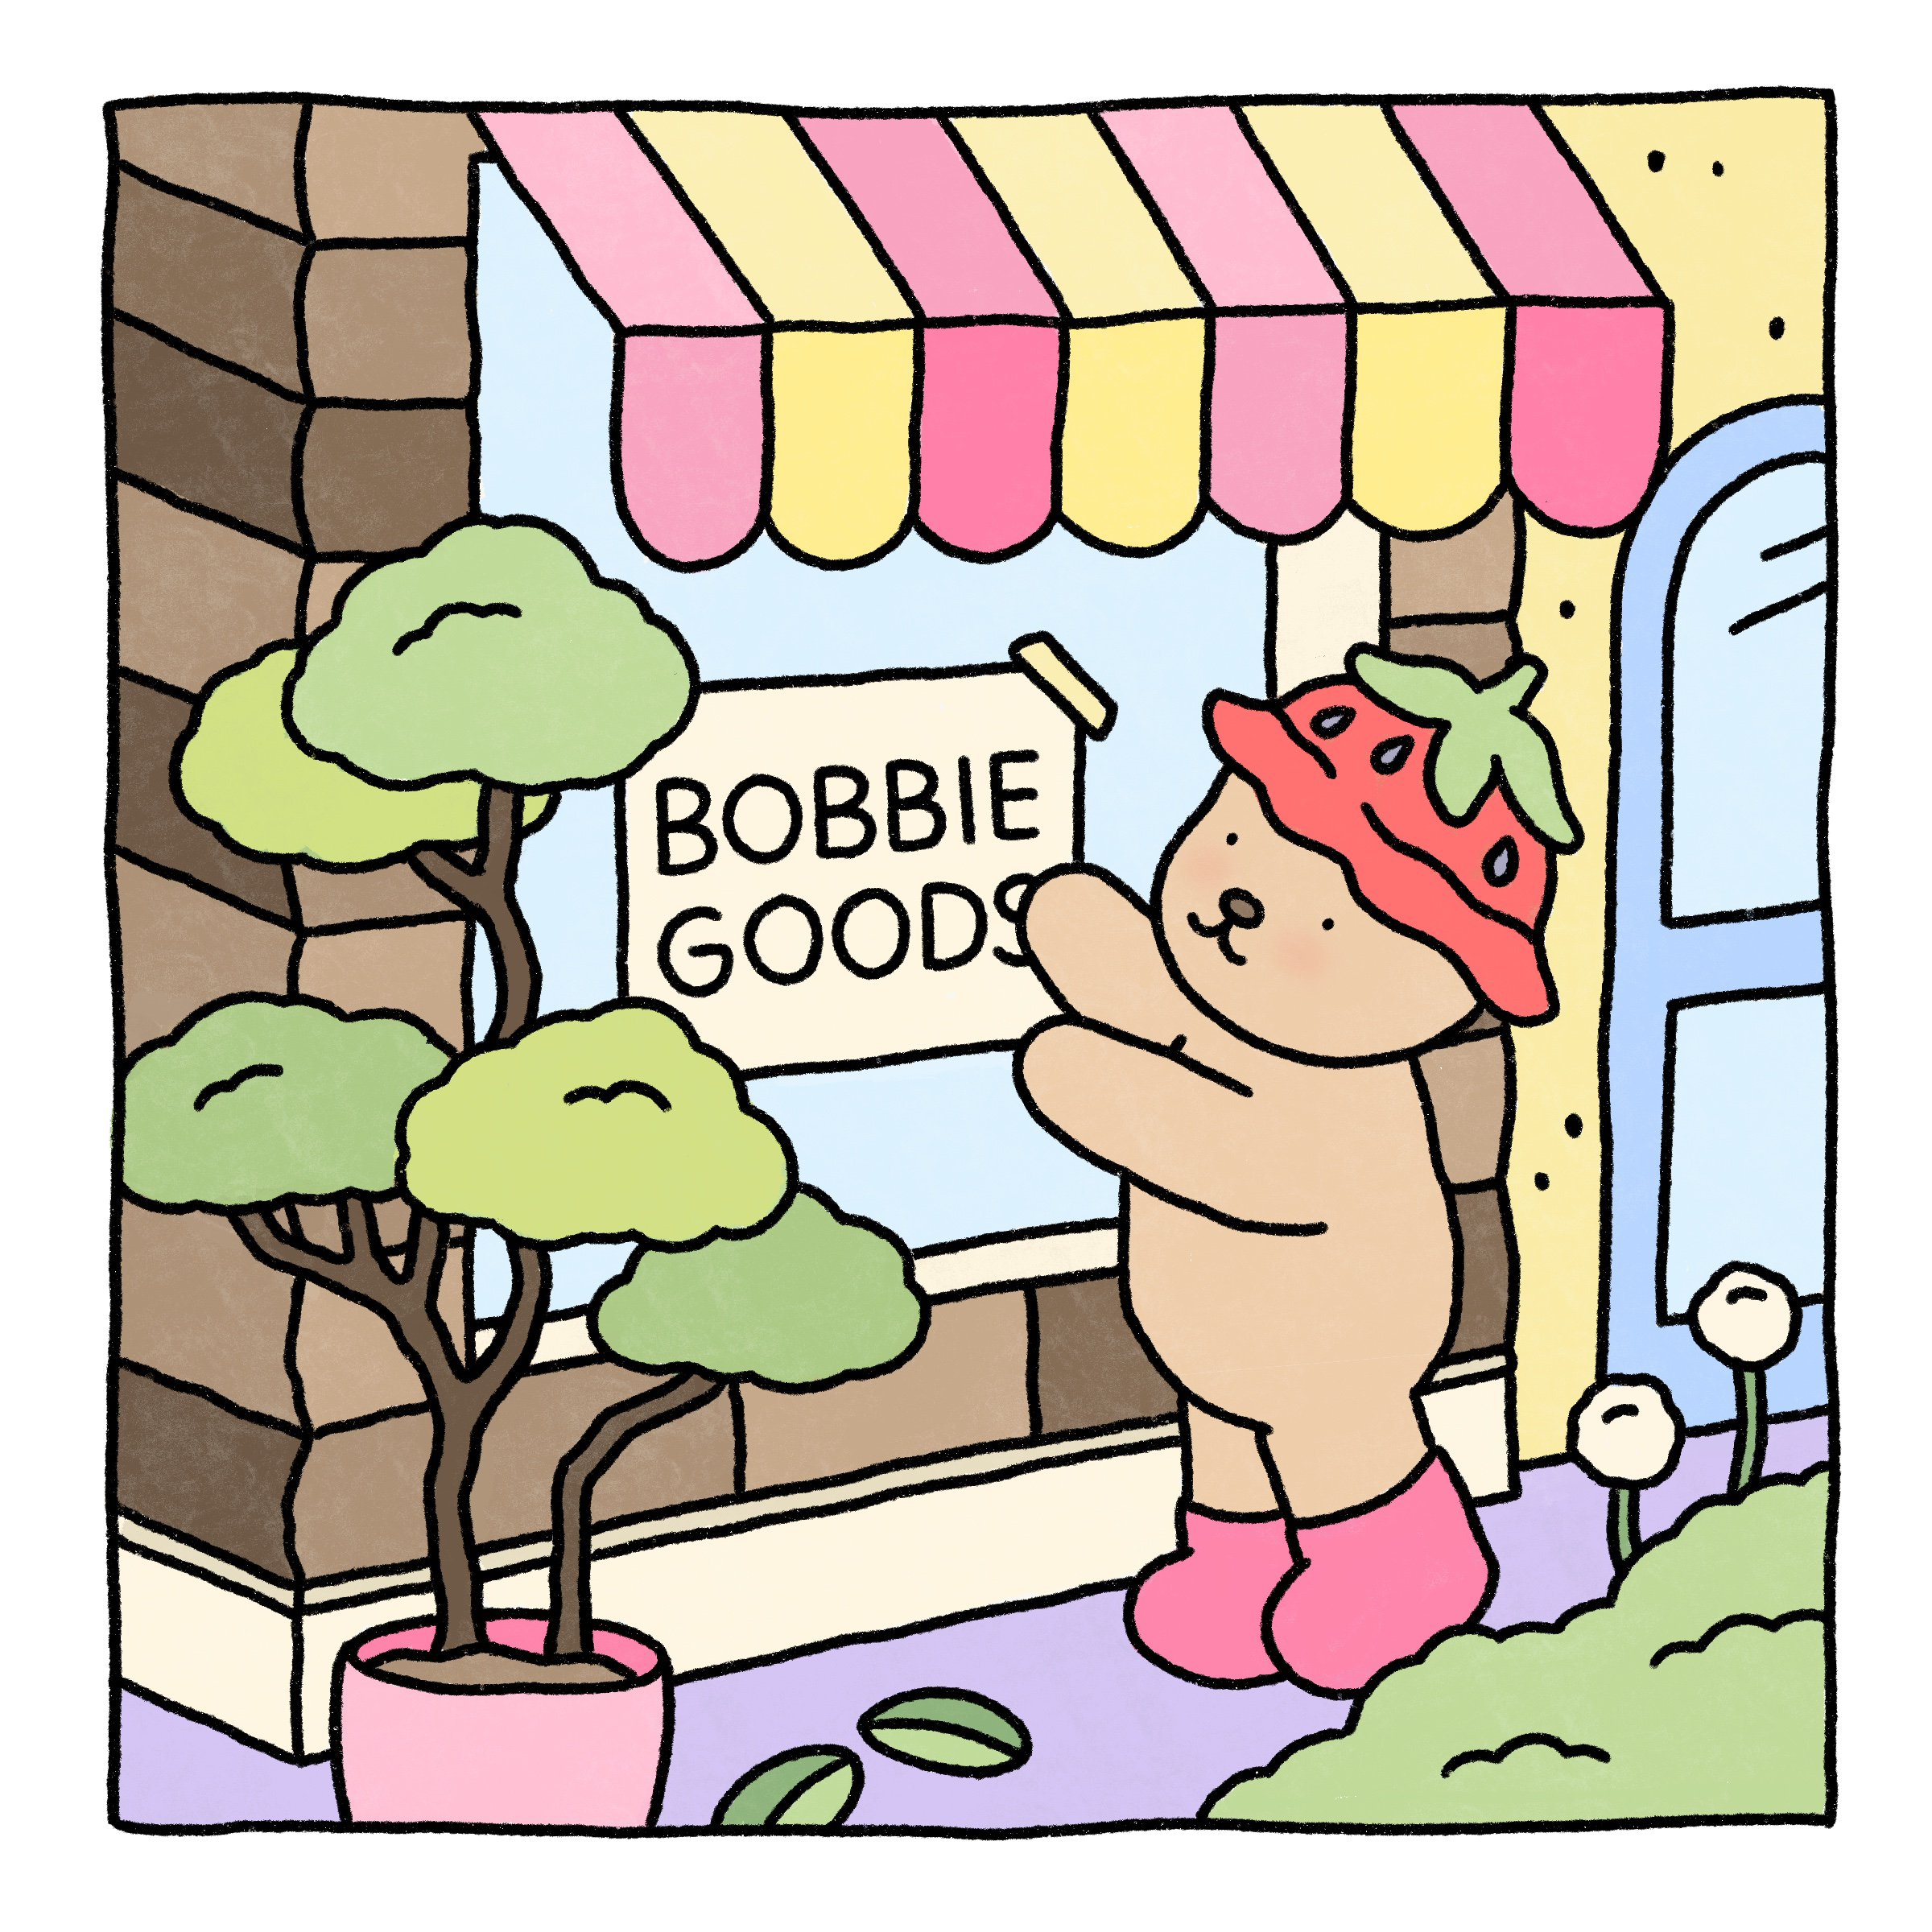 190 Bobbie goods ideas  coloring book art, cute coloring pages, coloring  books